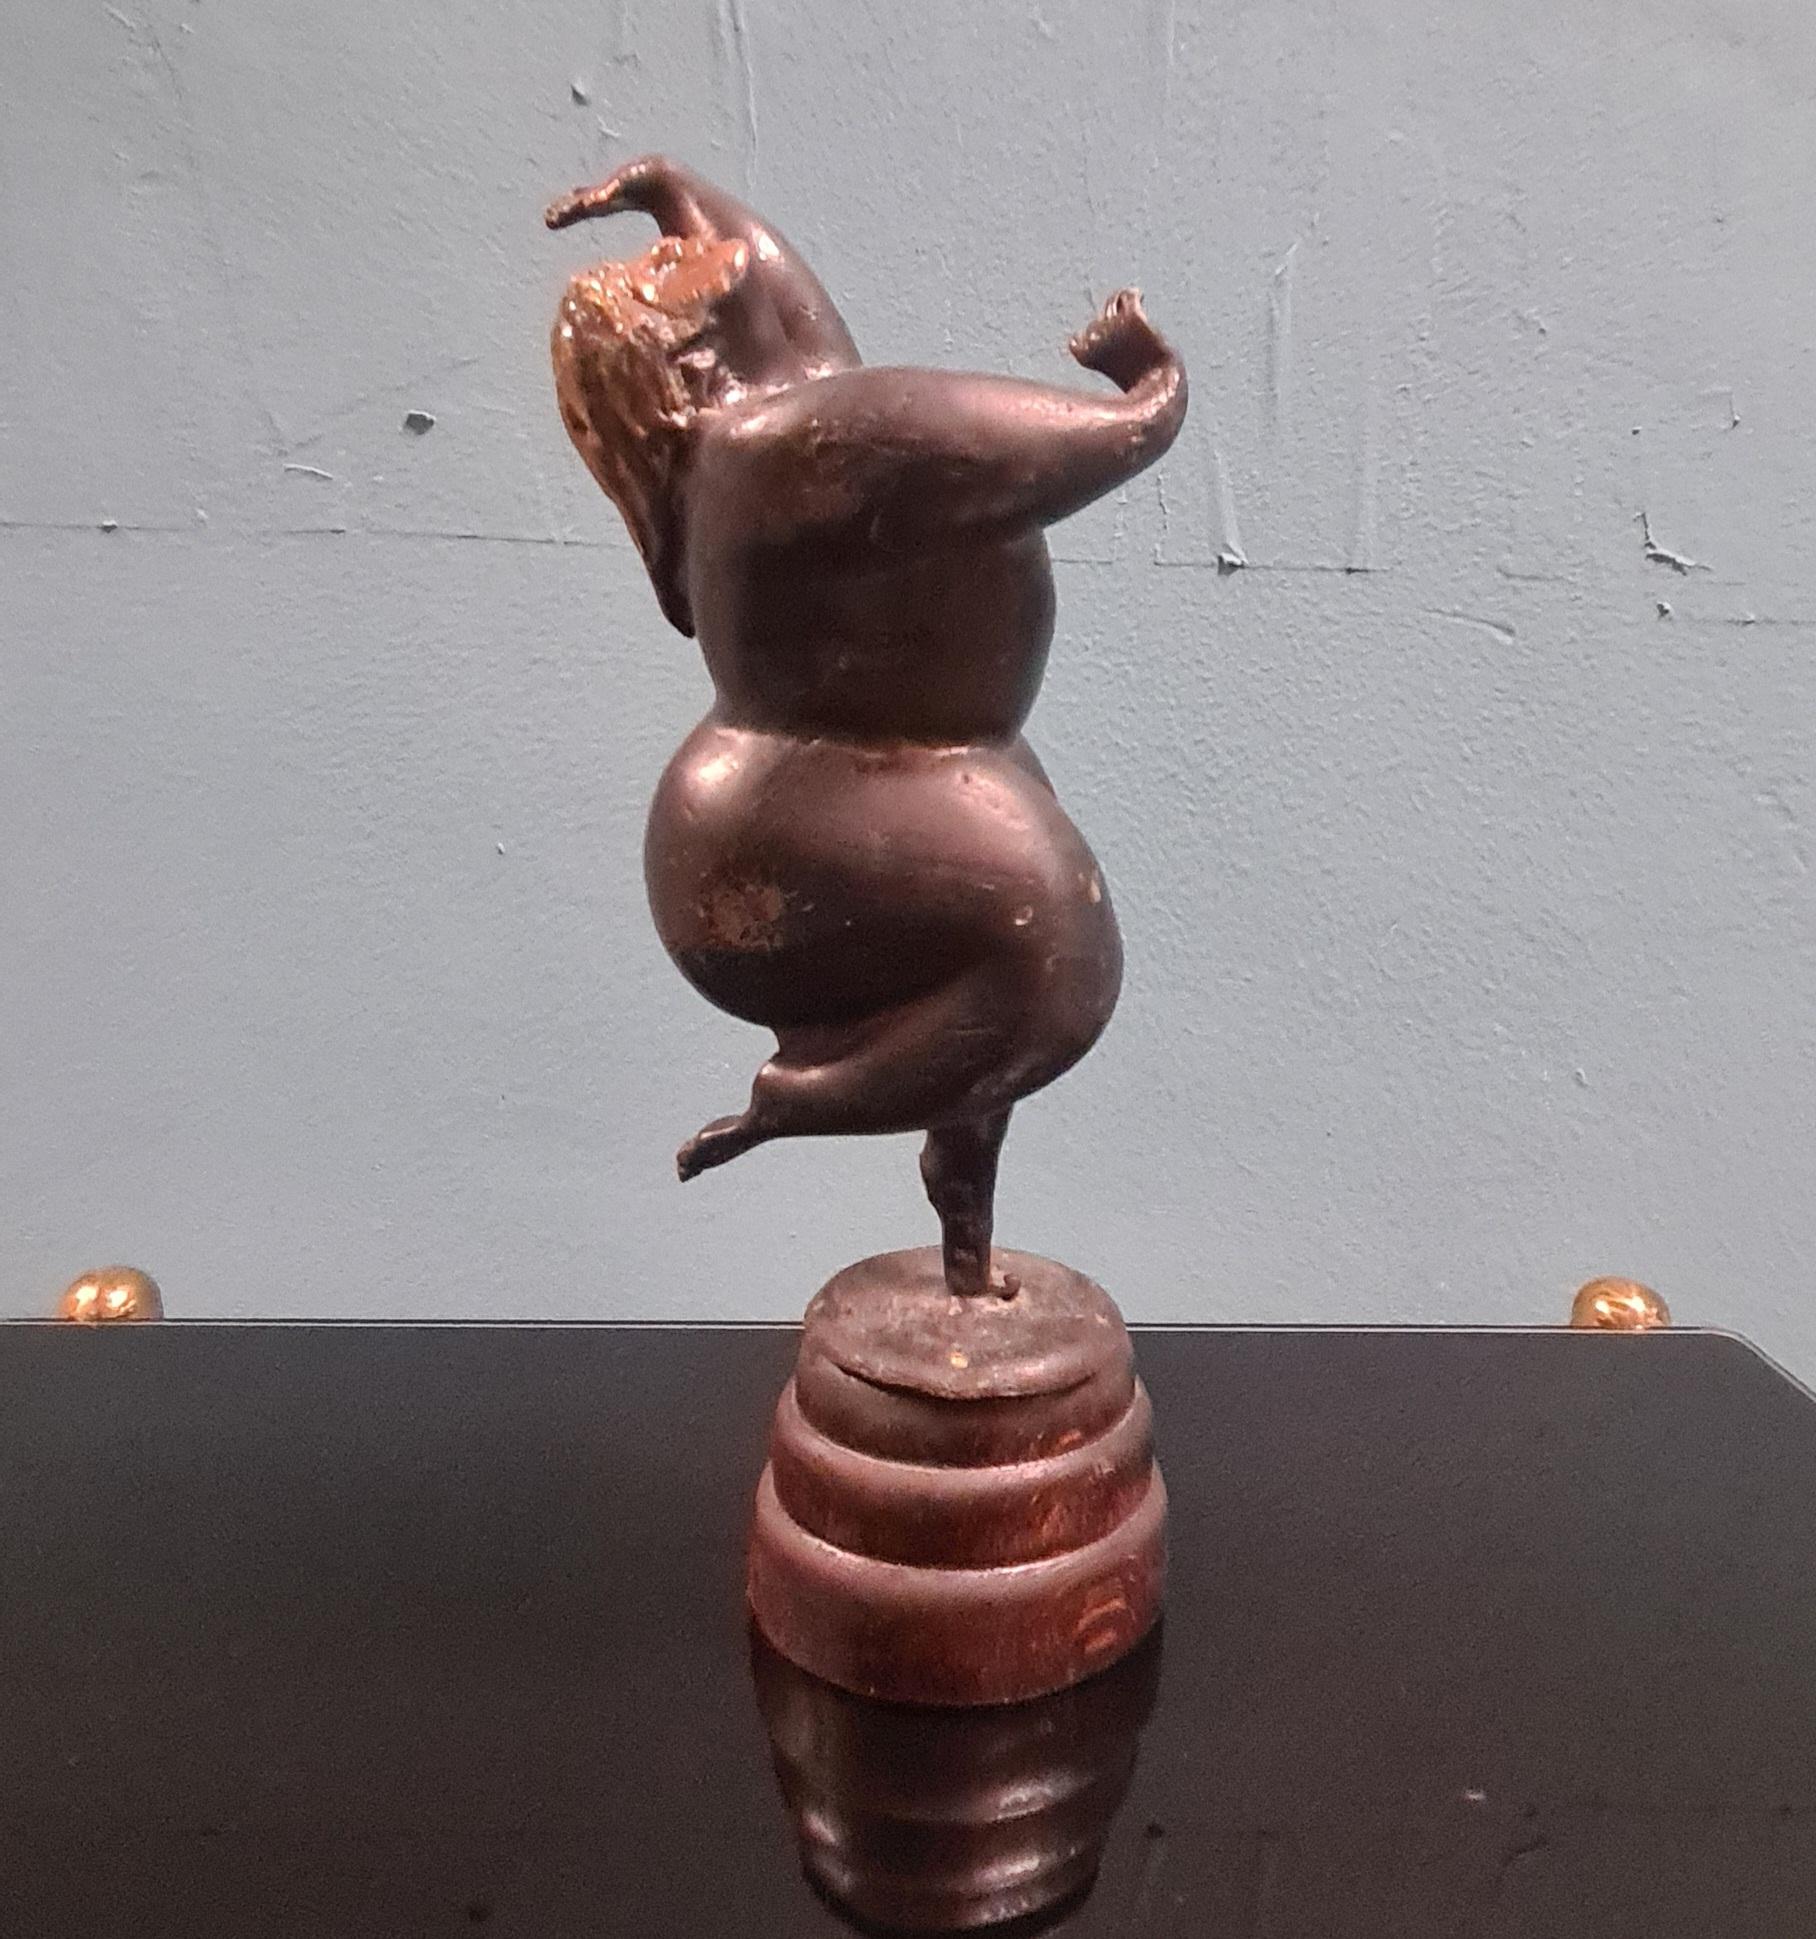 Bronze sculpture depicting female nude.

Small statue made of bronze with parts, such as the face, gilded with mercury and wooden base.

The sculpture depicts a sinuous female figure with abundant forms in a dancing pose that exudes joy.

It is